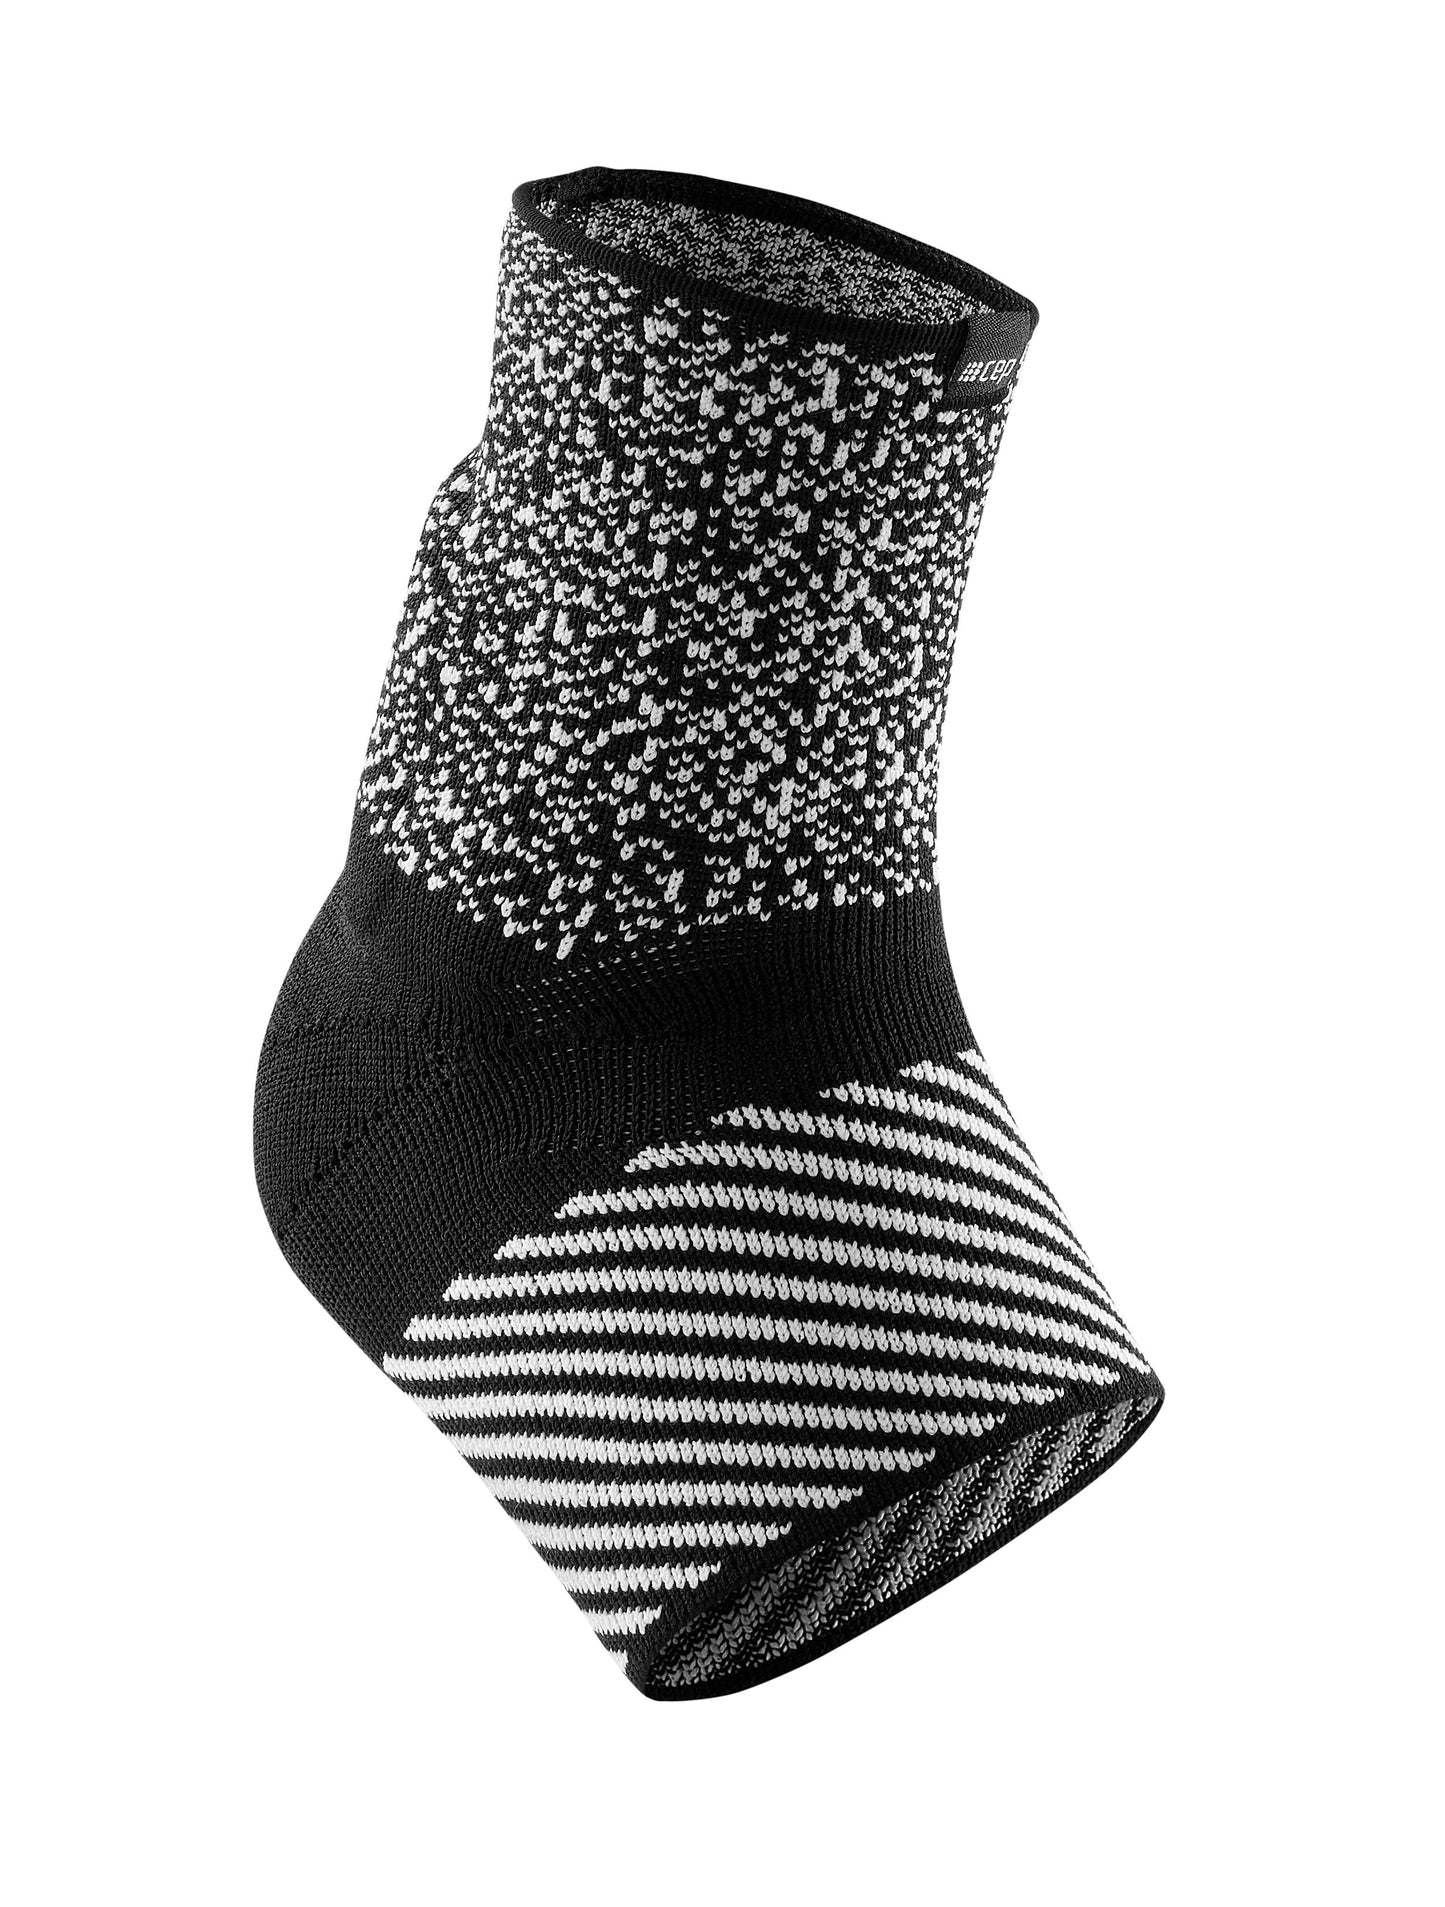 CEP Max Support Achilles Sleeve - Black / White